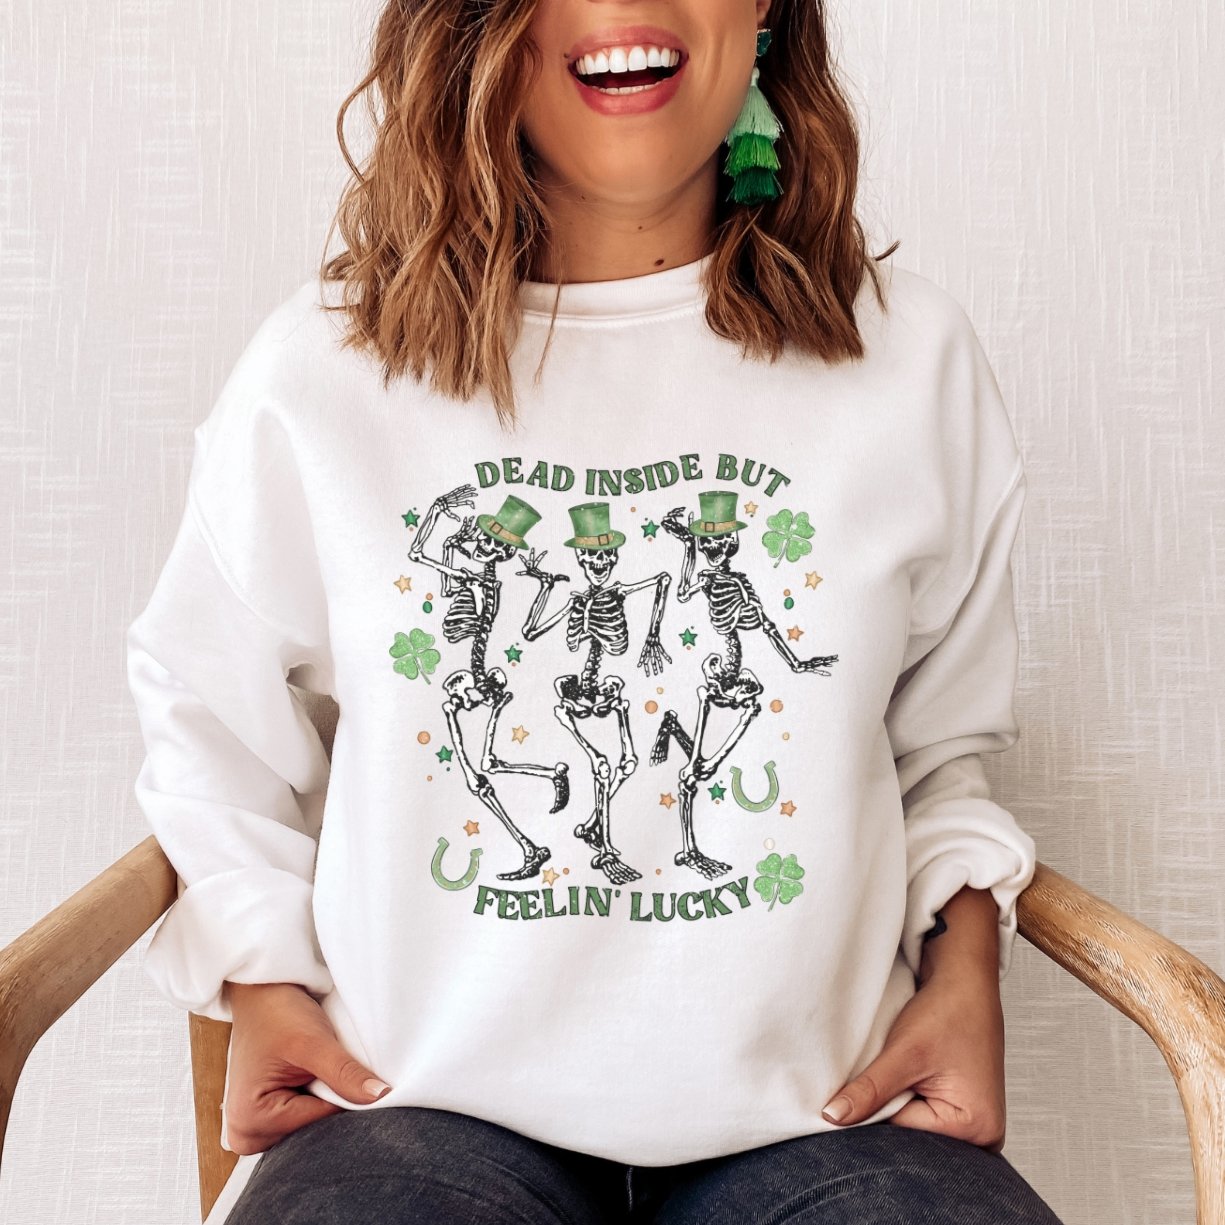 Dead Inside but Feeling Lucky St. Patrick's Day Crewneck Sweatshirt (S-2XL) - Trendznmore